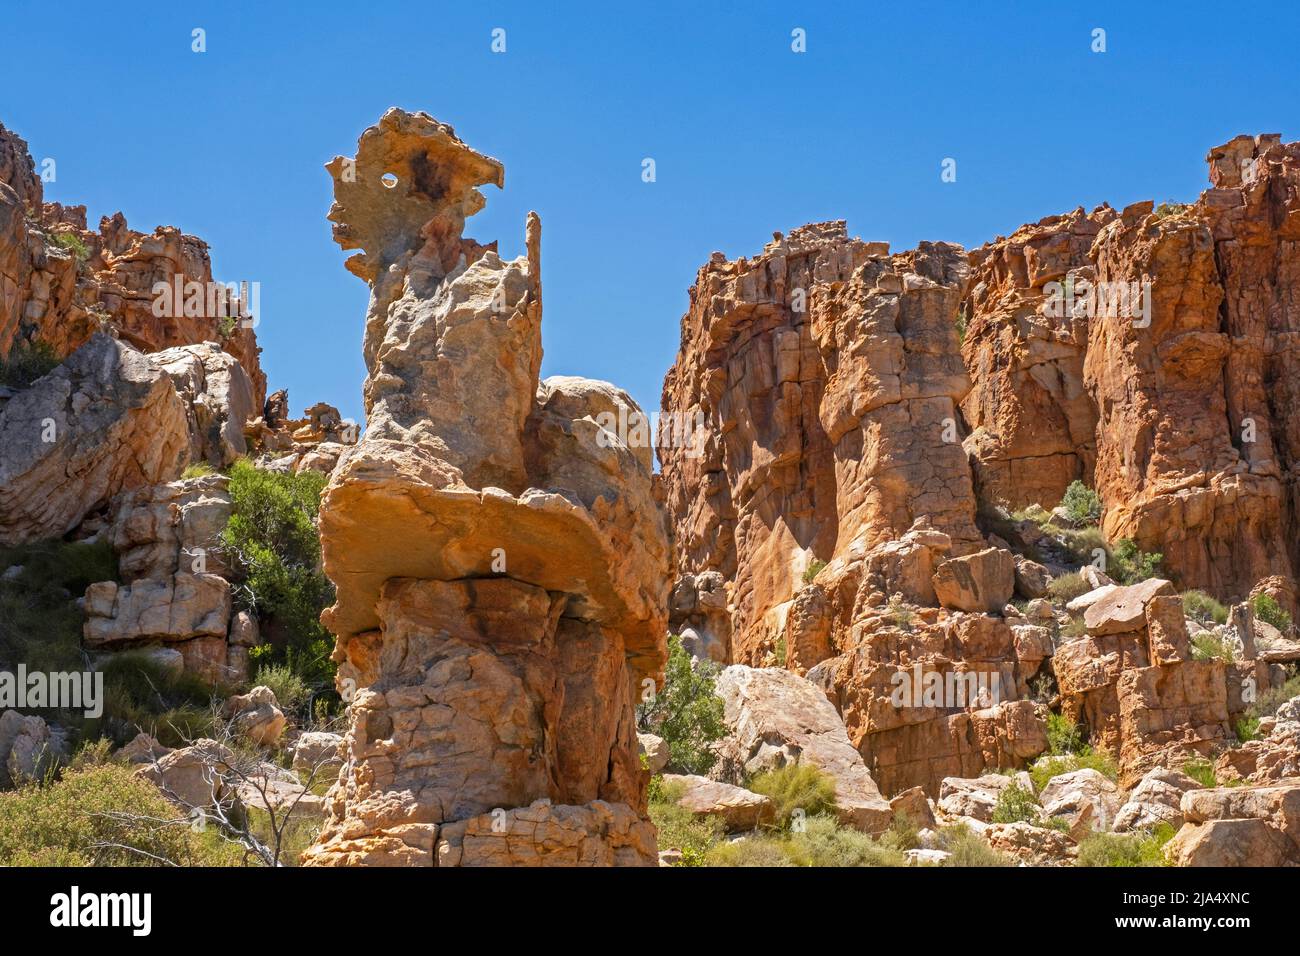 Sandstone rock formations at Truitjieskraal in the Matjiesrivier Nature Reserve, Cederberg Wilderness, Western Cape, South Africa Stock Photo